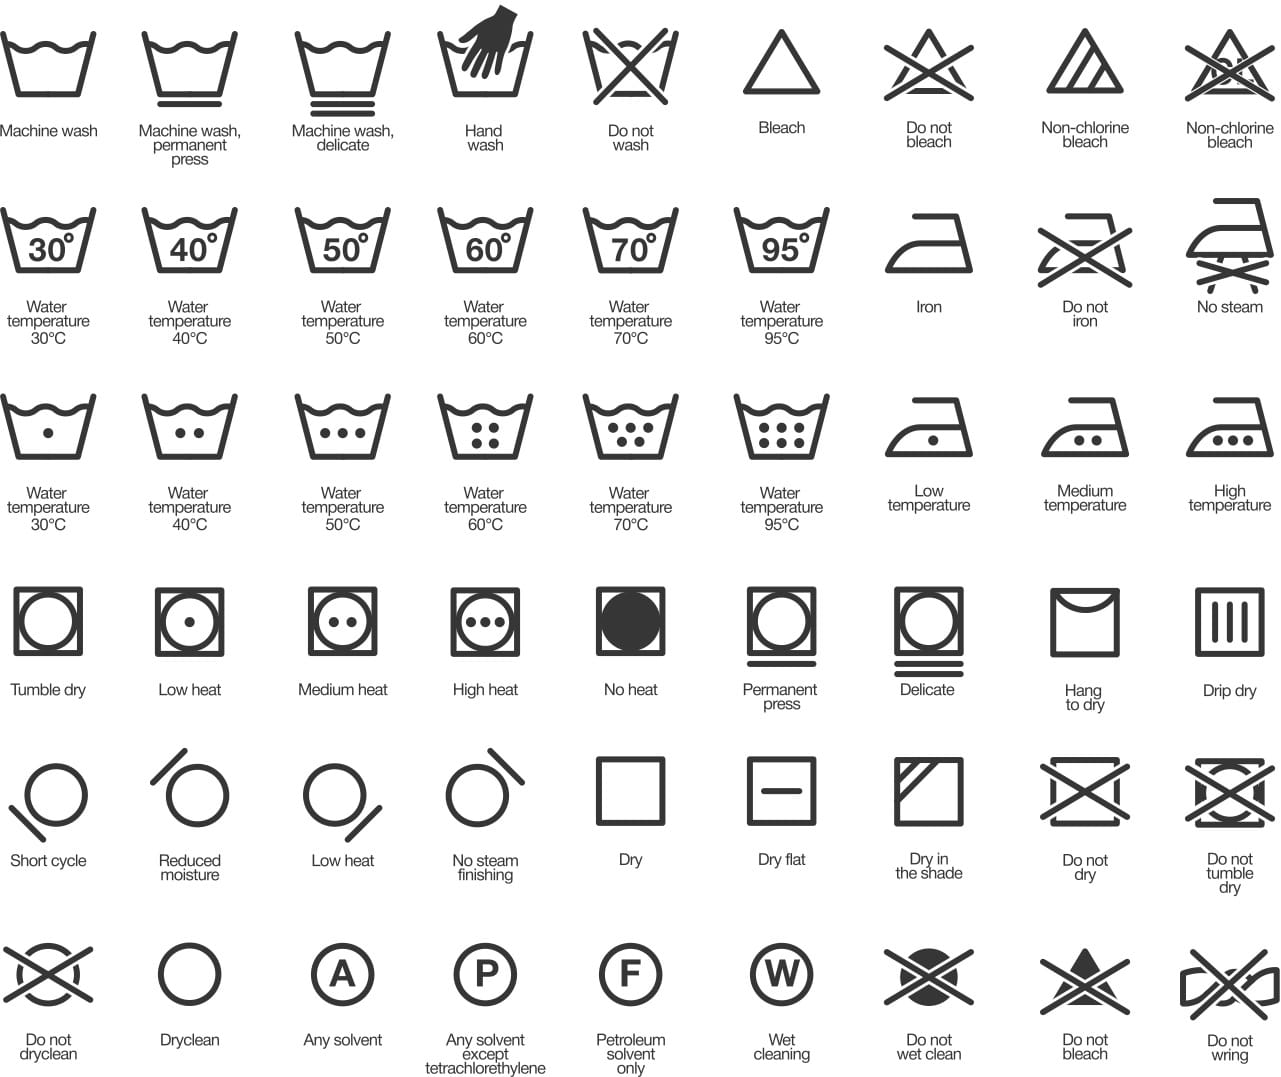 Here's What The Laundry Symbols On Clothing Tags Mean